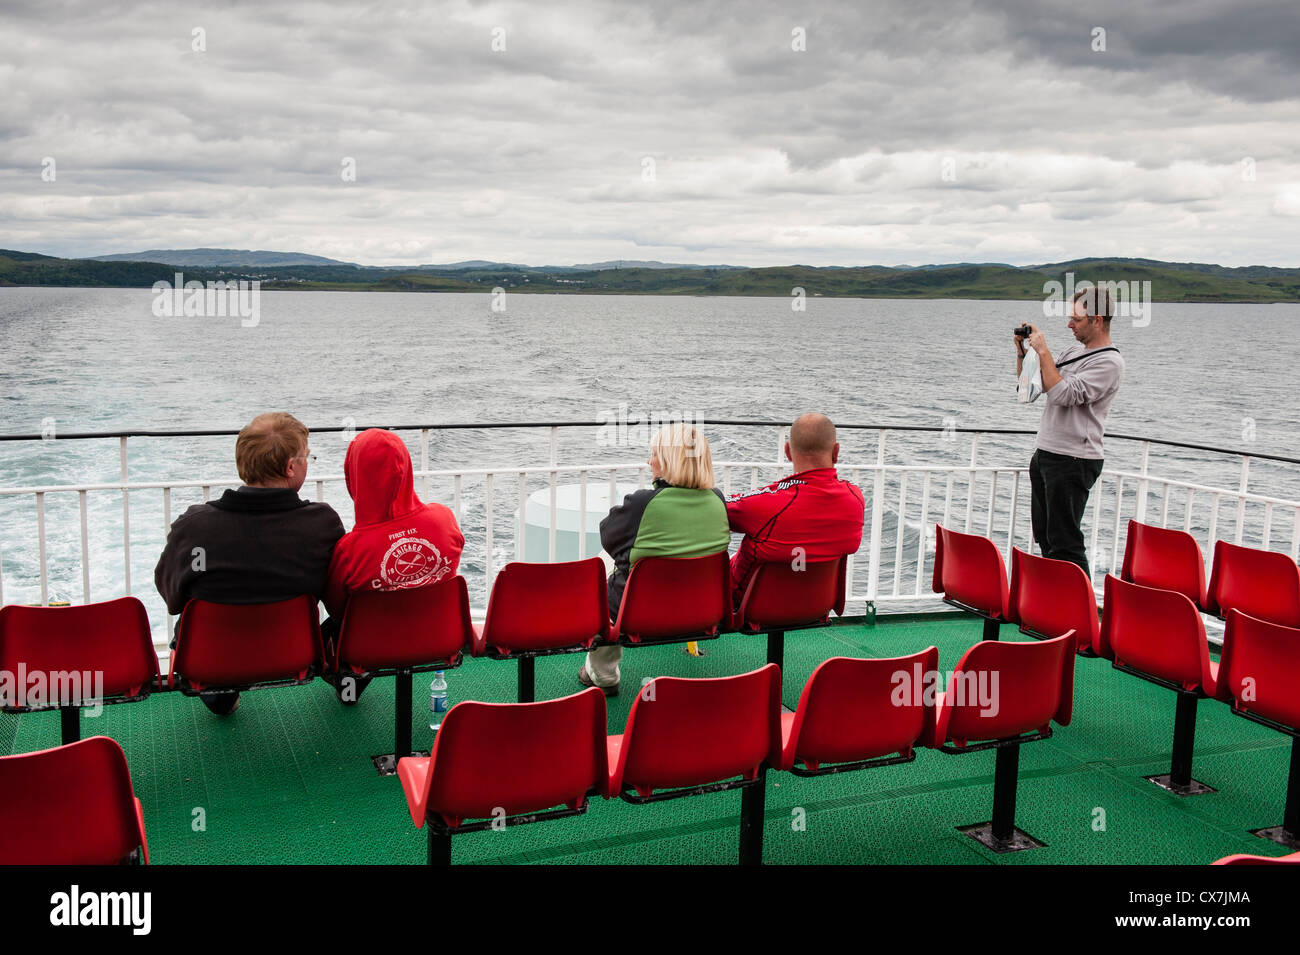 On the ferry from Oban to the island of Mull in Western Scotland. Stock Photo